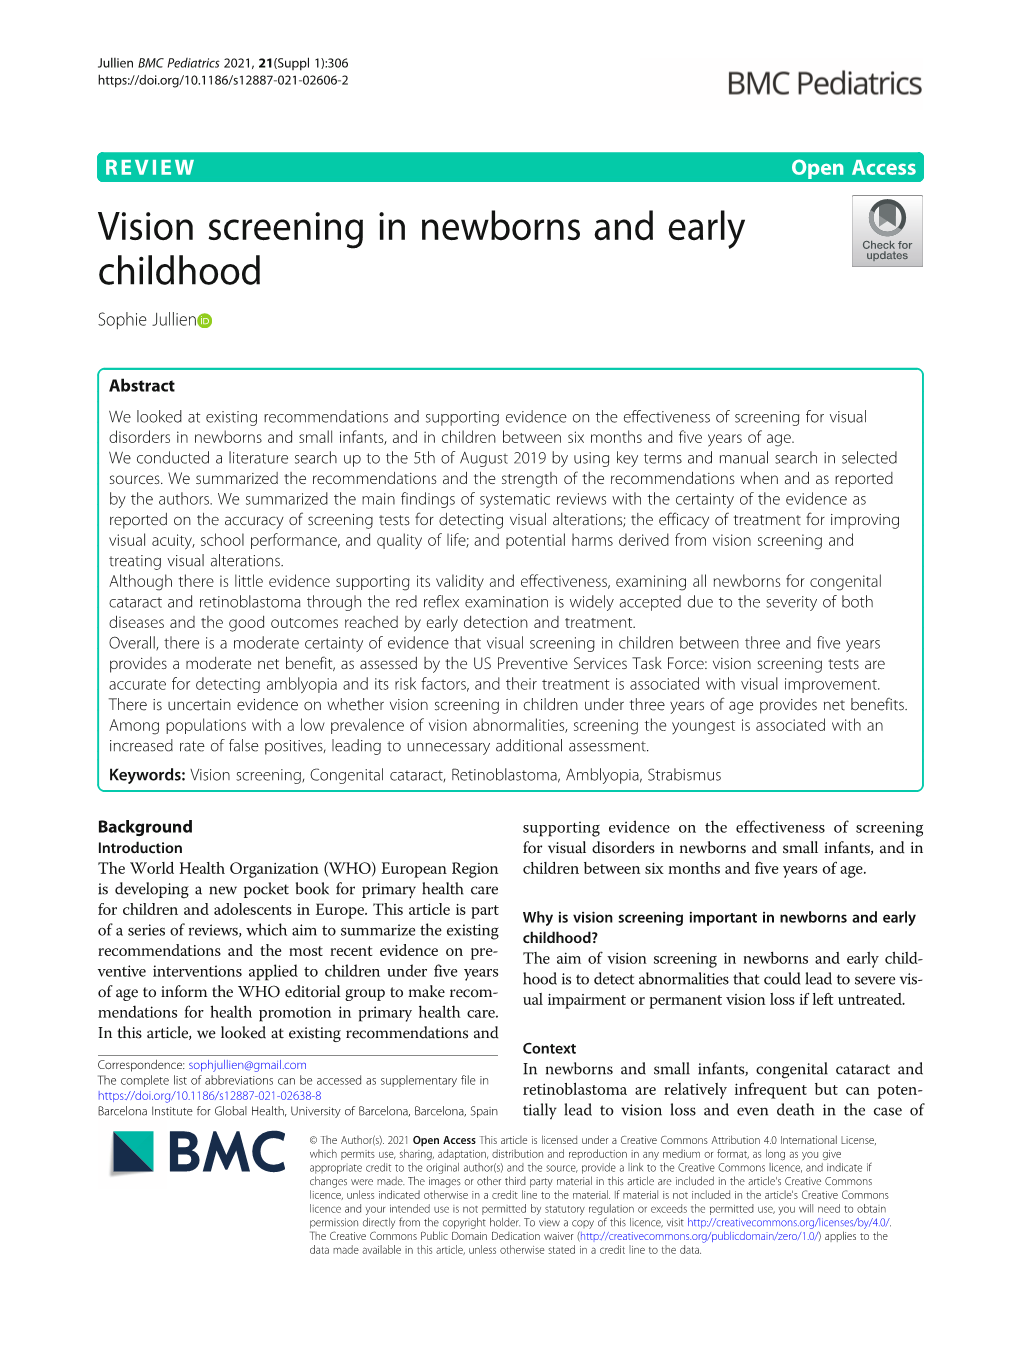 Vision Screening in Newborns and Early Childhood Sophie Jullien